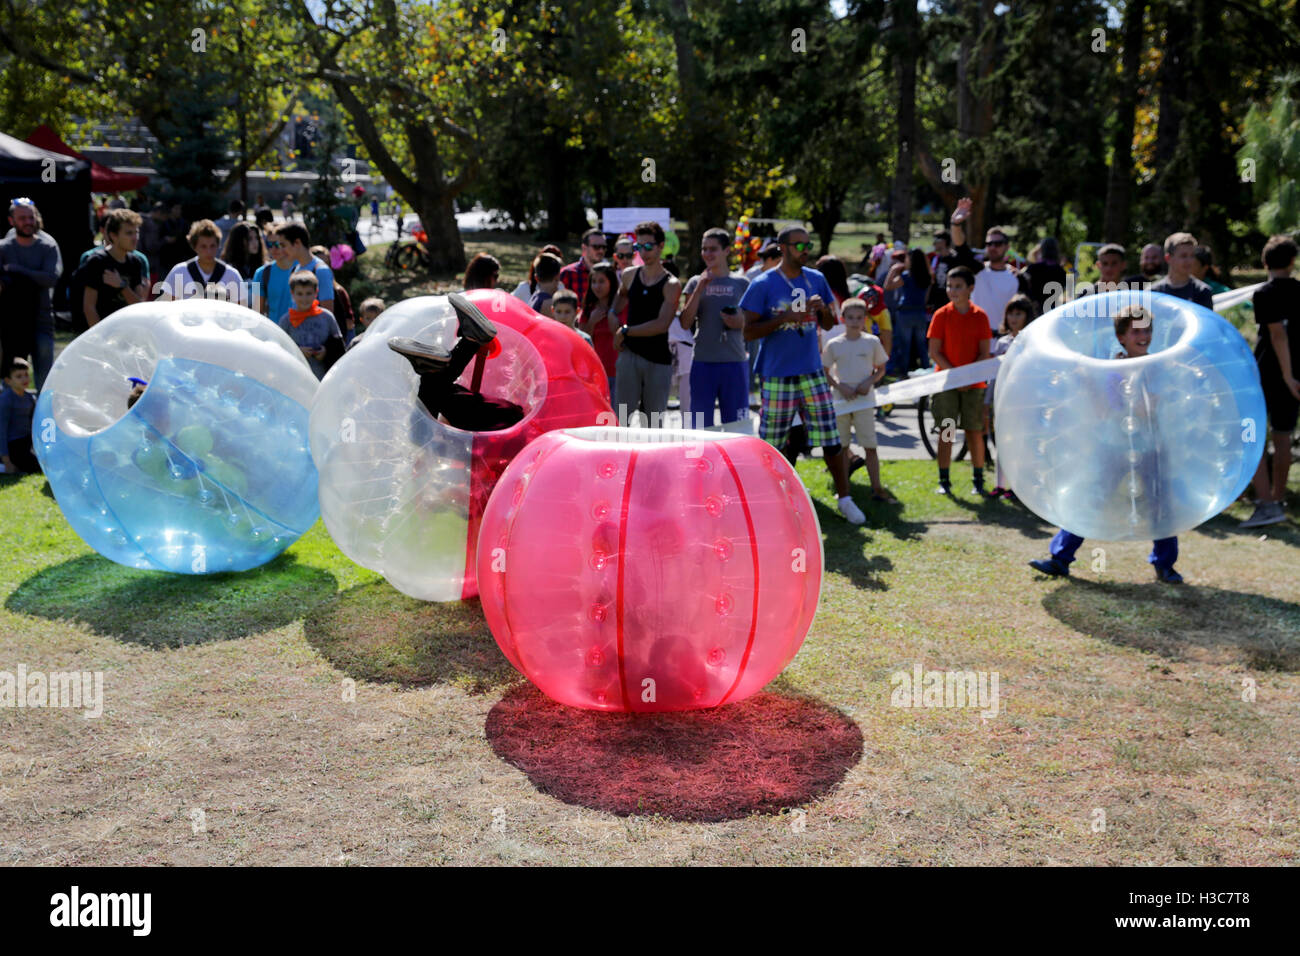 Sofia, Bulgaria - September 24, 2016: Boys are playing bubble football game in the park. Stock Photo